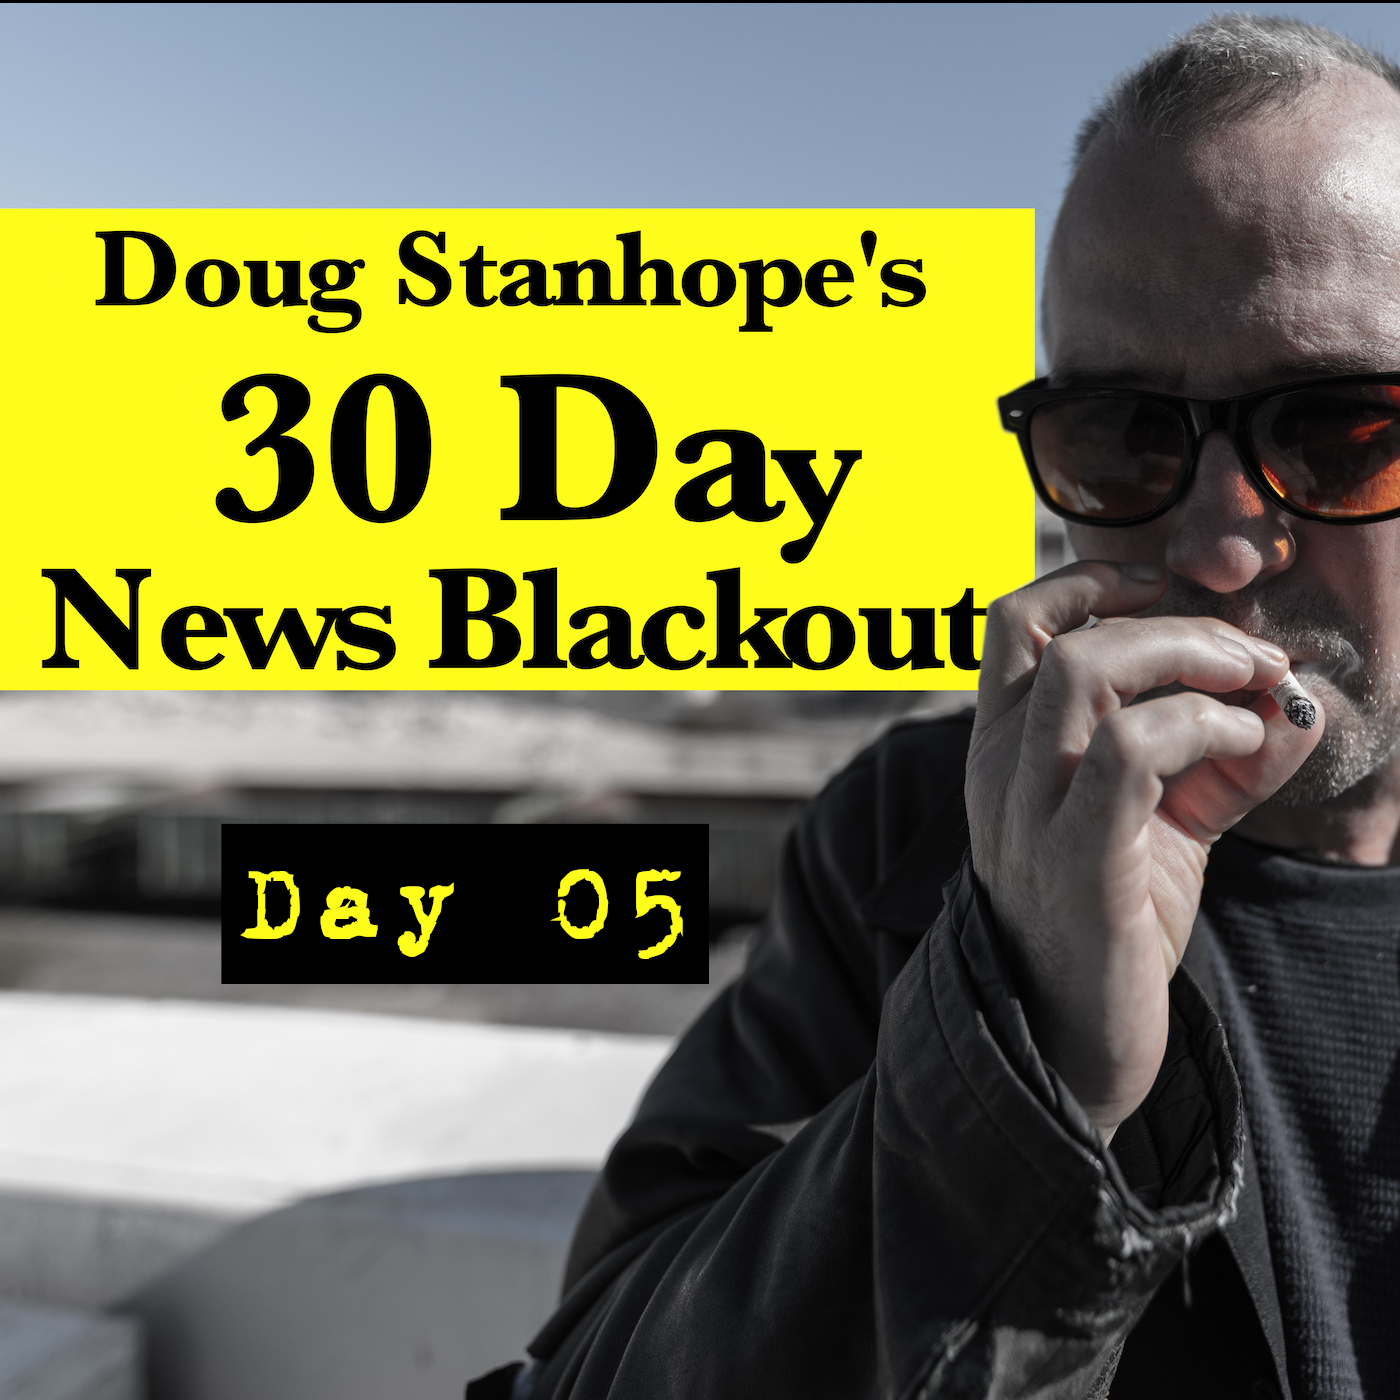 Ep.#368: Day 05 - Stanhope’s 30 Day News Blackout